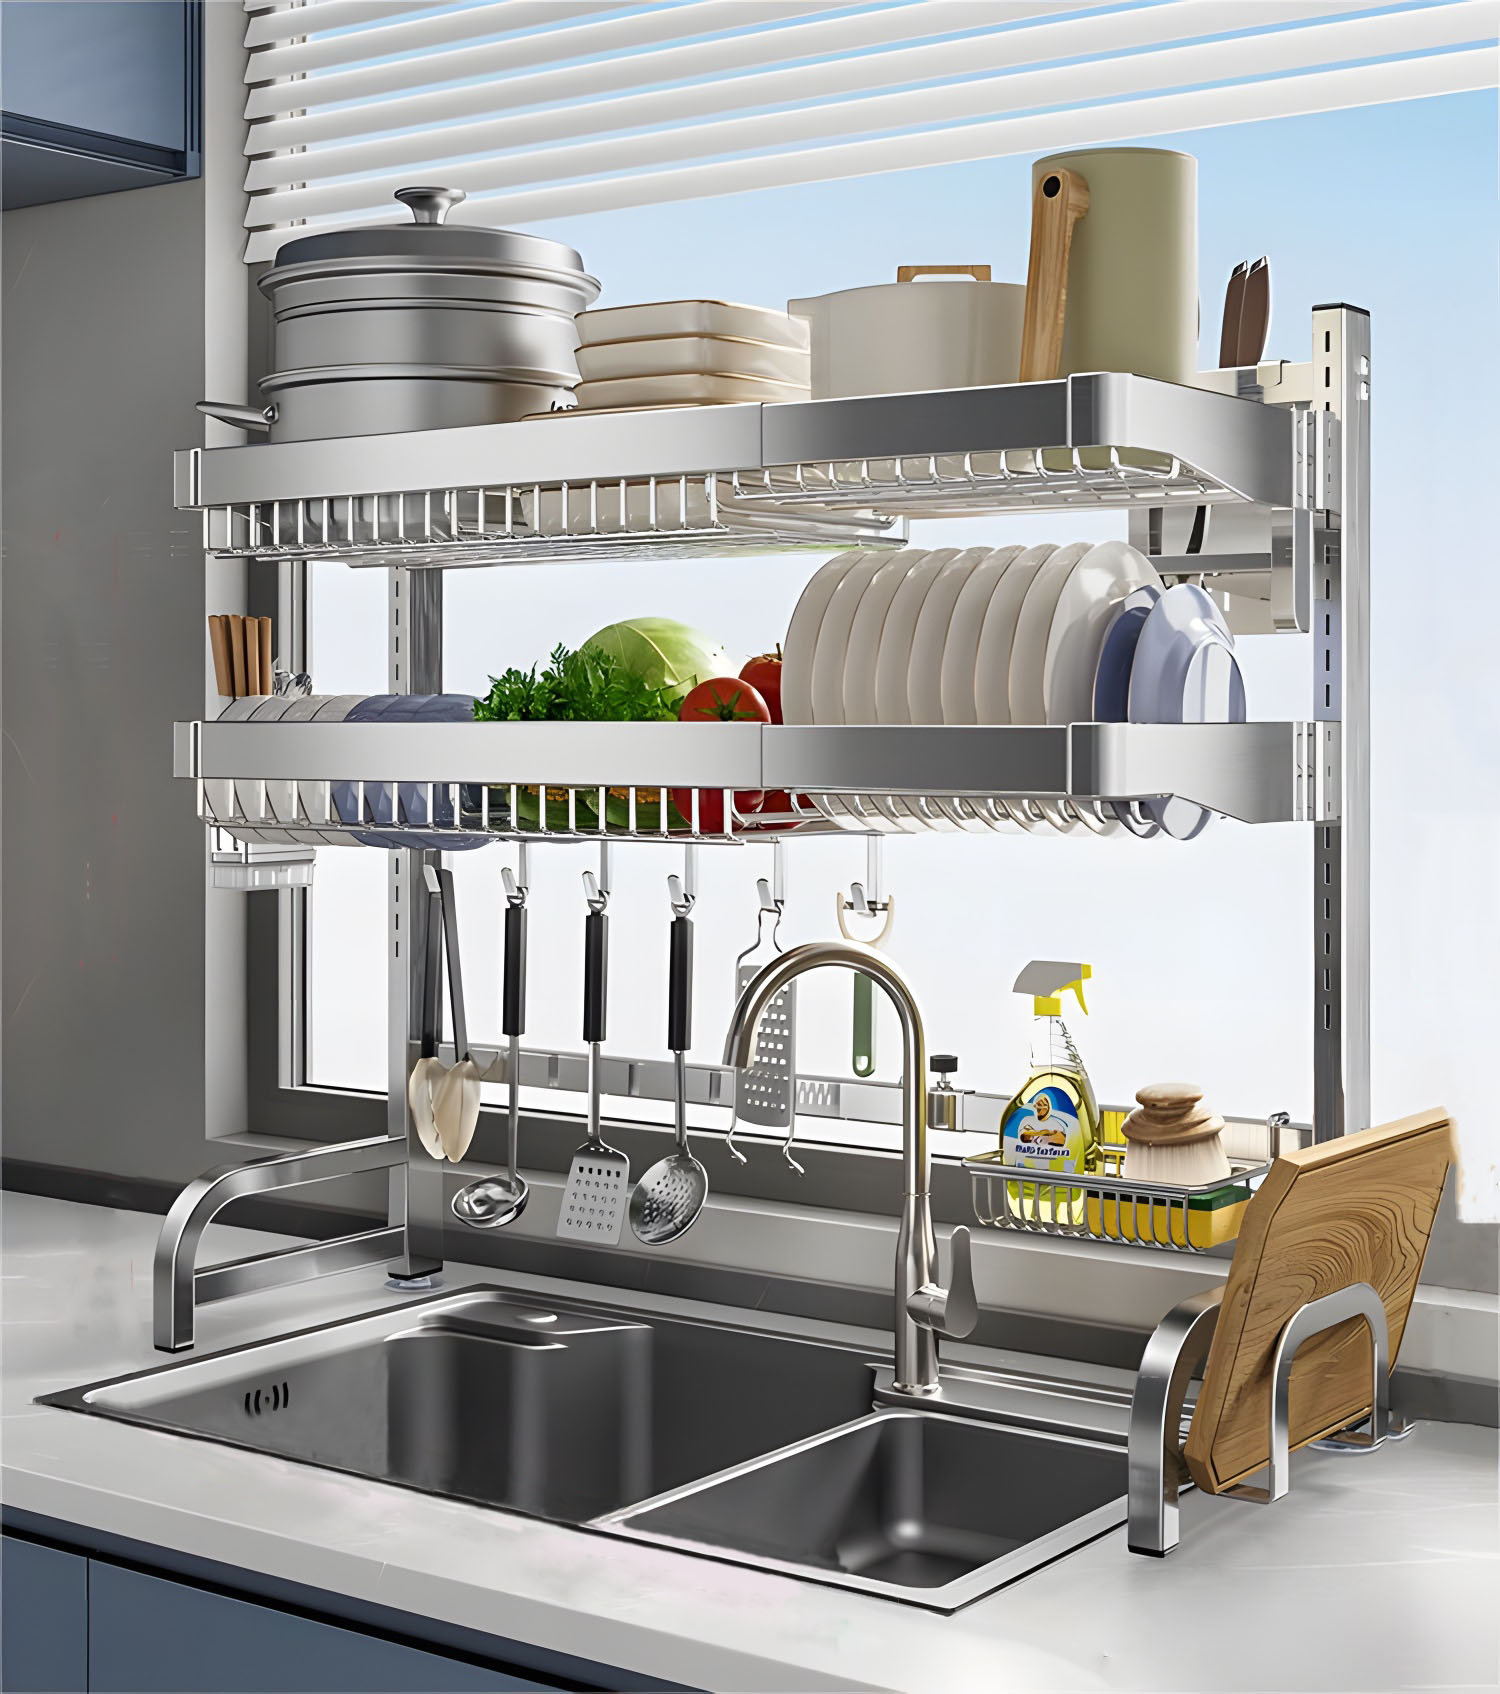 Captive Gala Stainless Steel in Sink Dish Rack